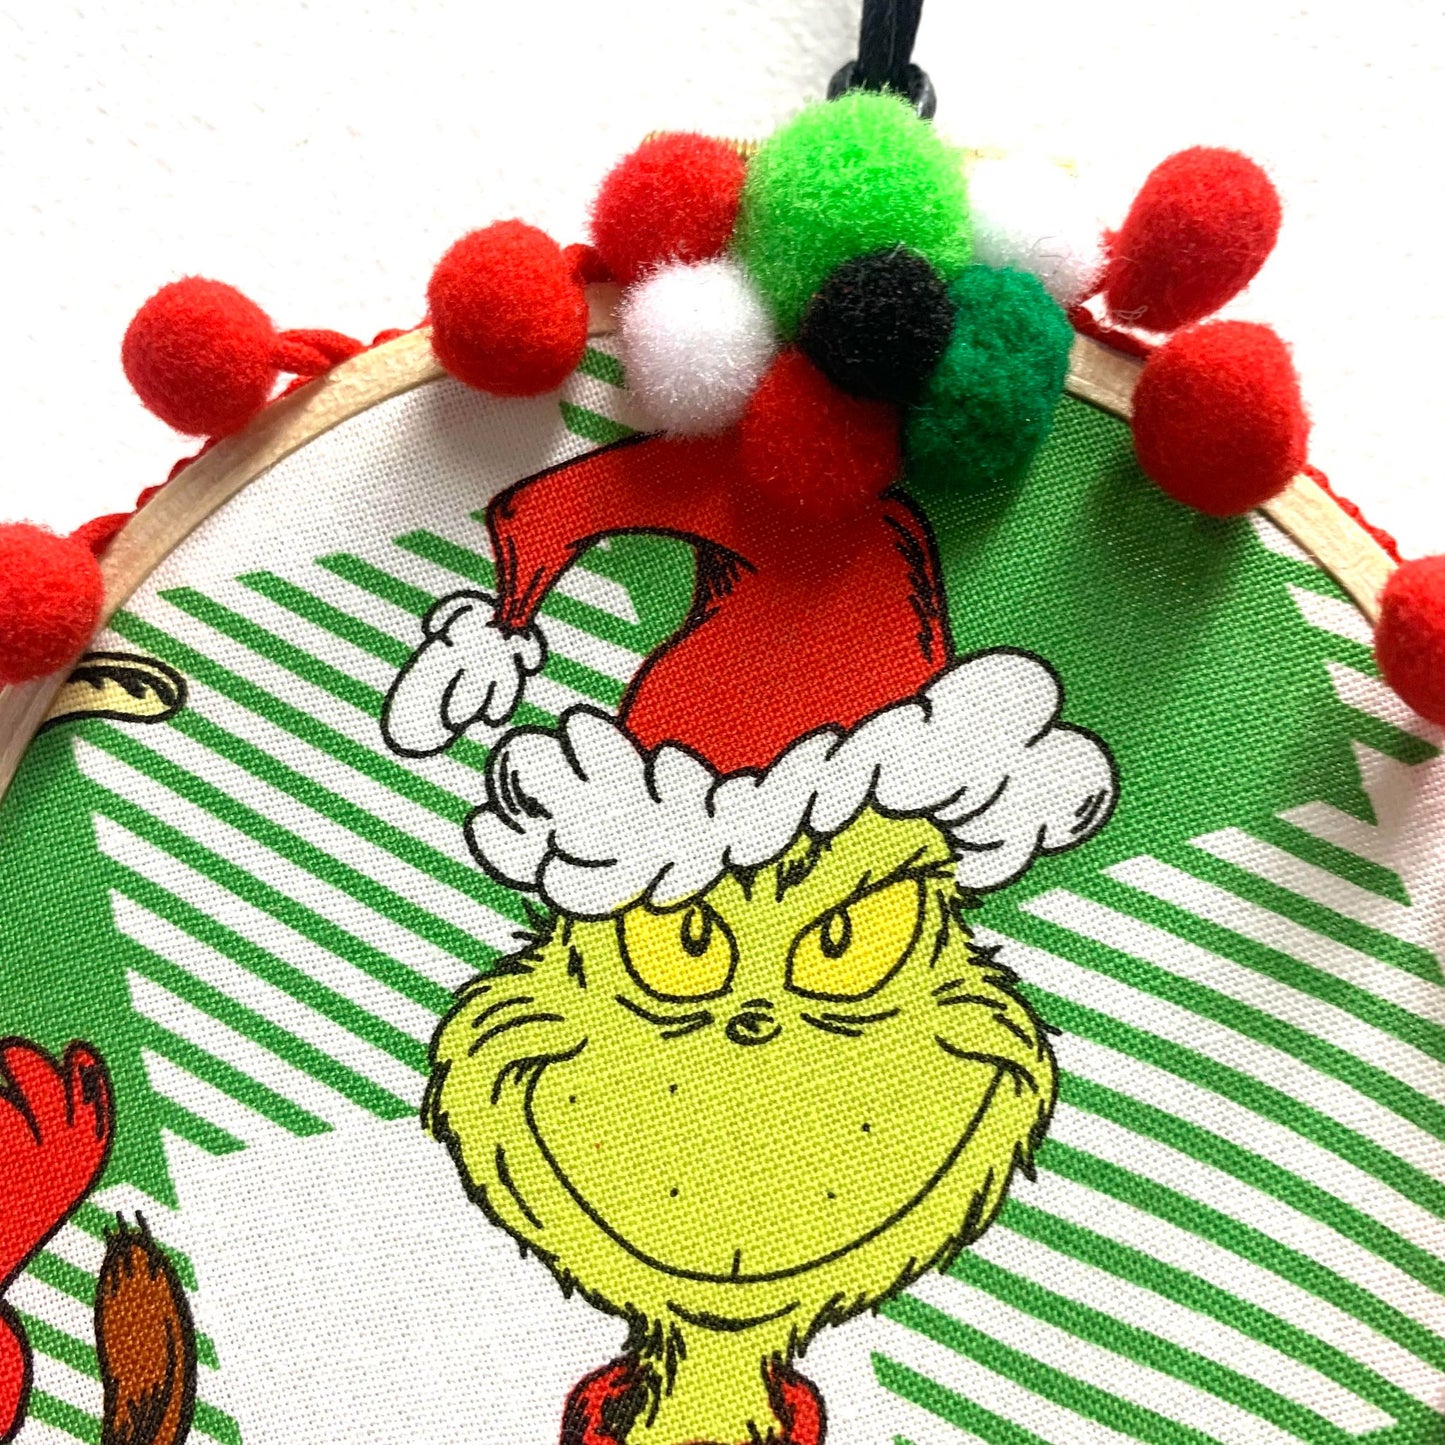 THIS BIRD HAS FLOWN- "The Grinch" Small Embroidery Hoop Christmas Decoration